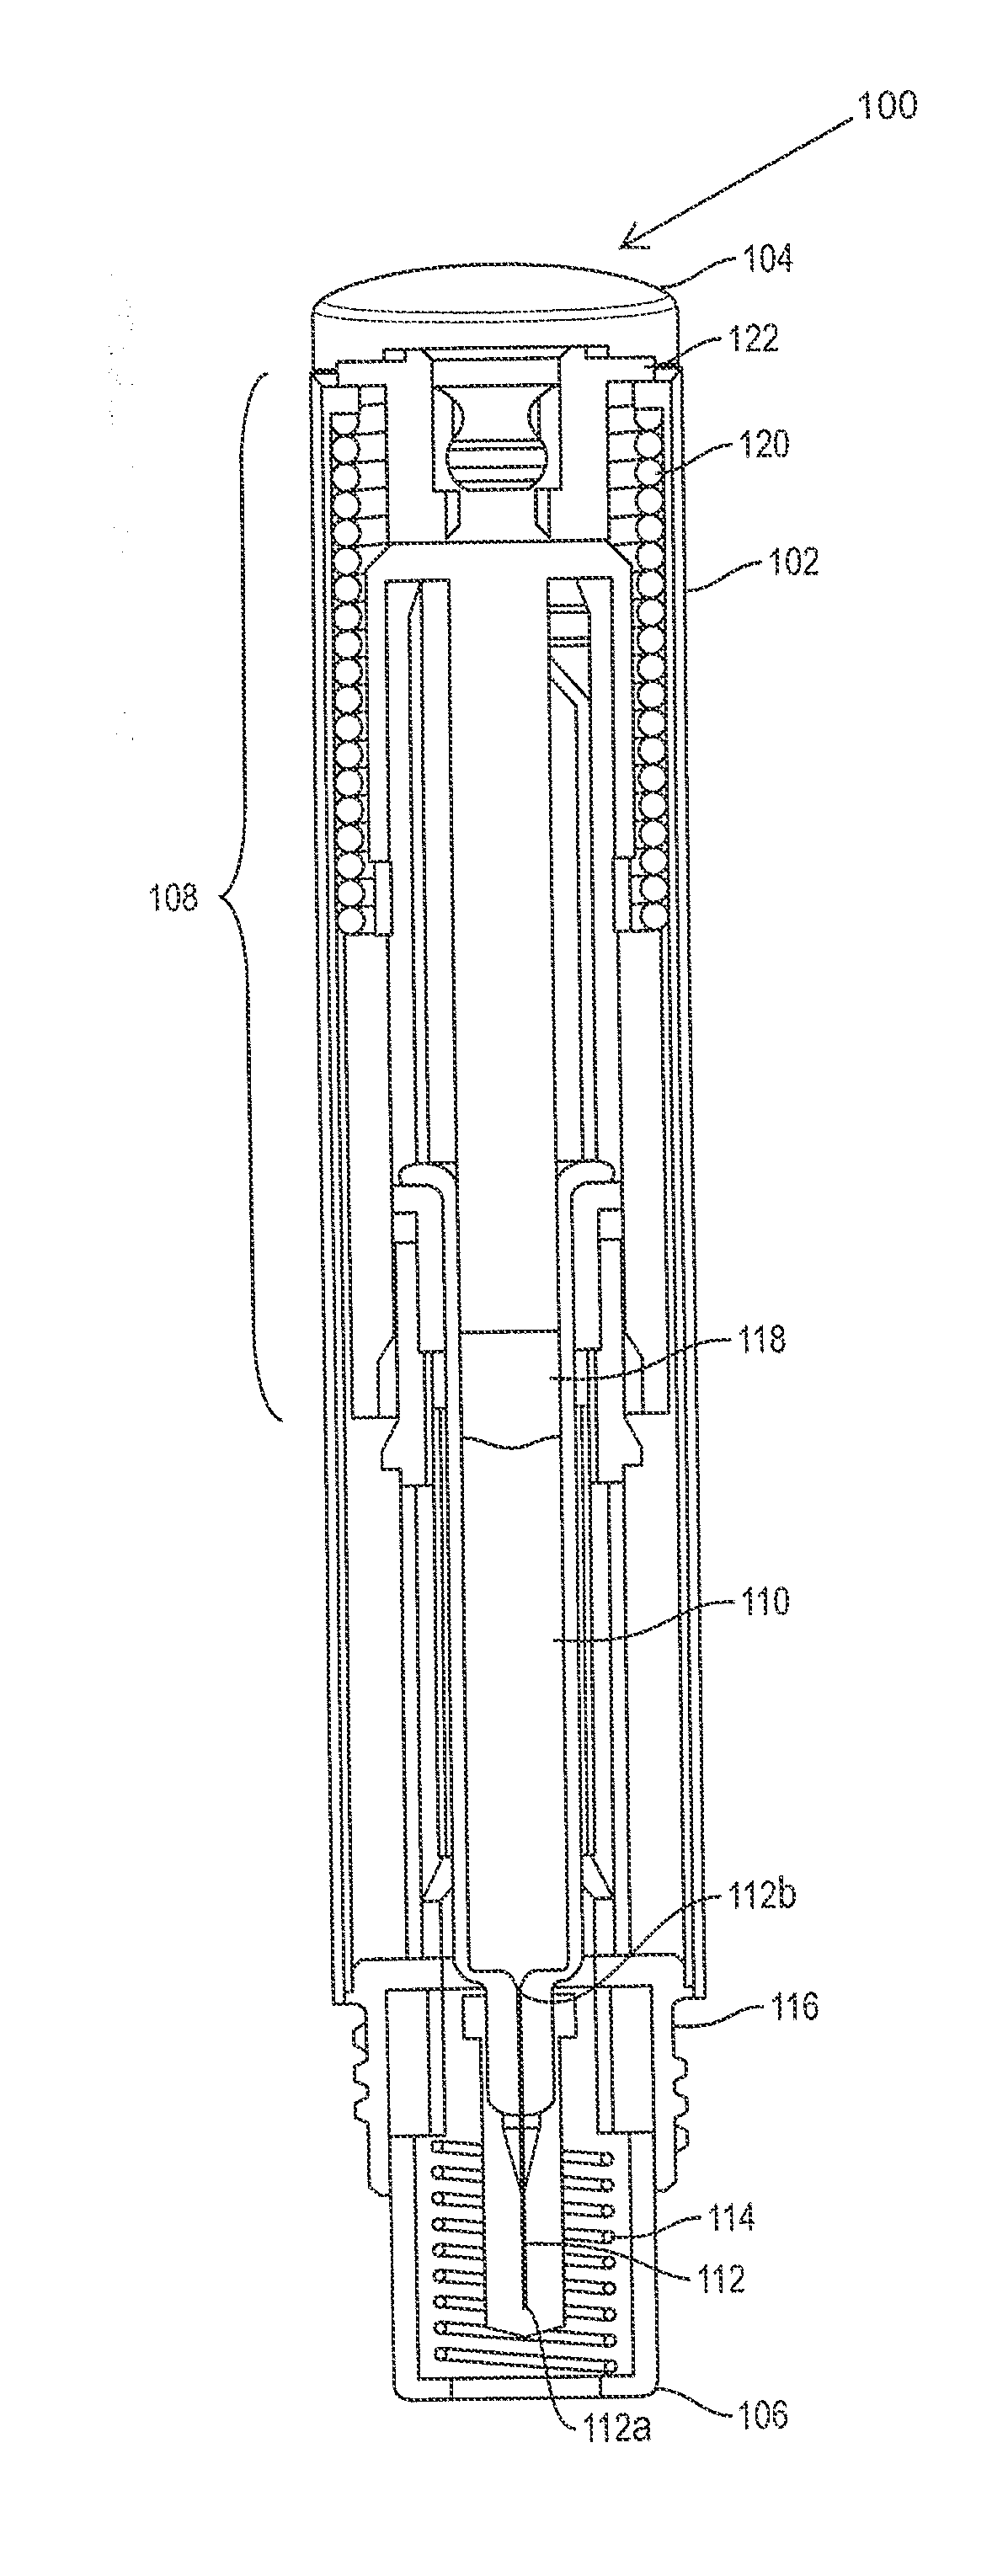 Needle assisted jet injection device having reduced trigger force